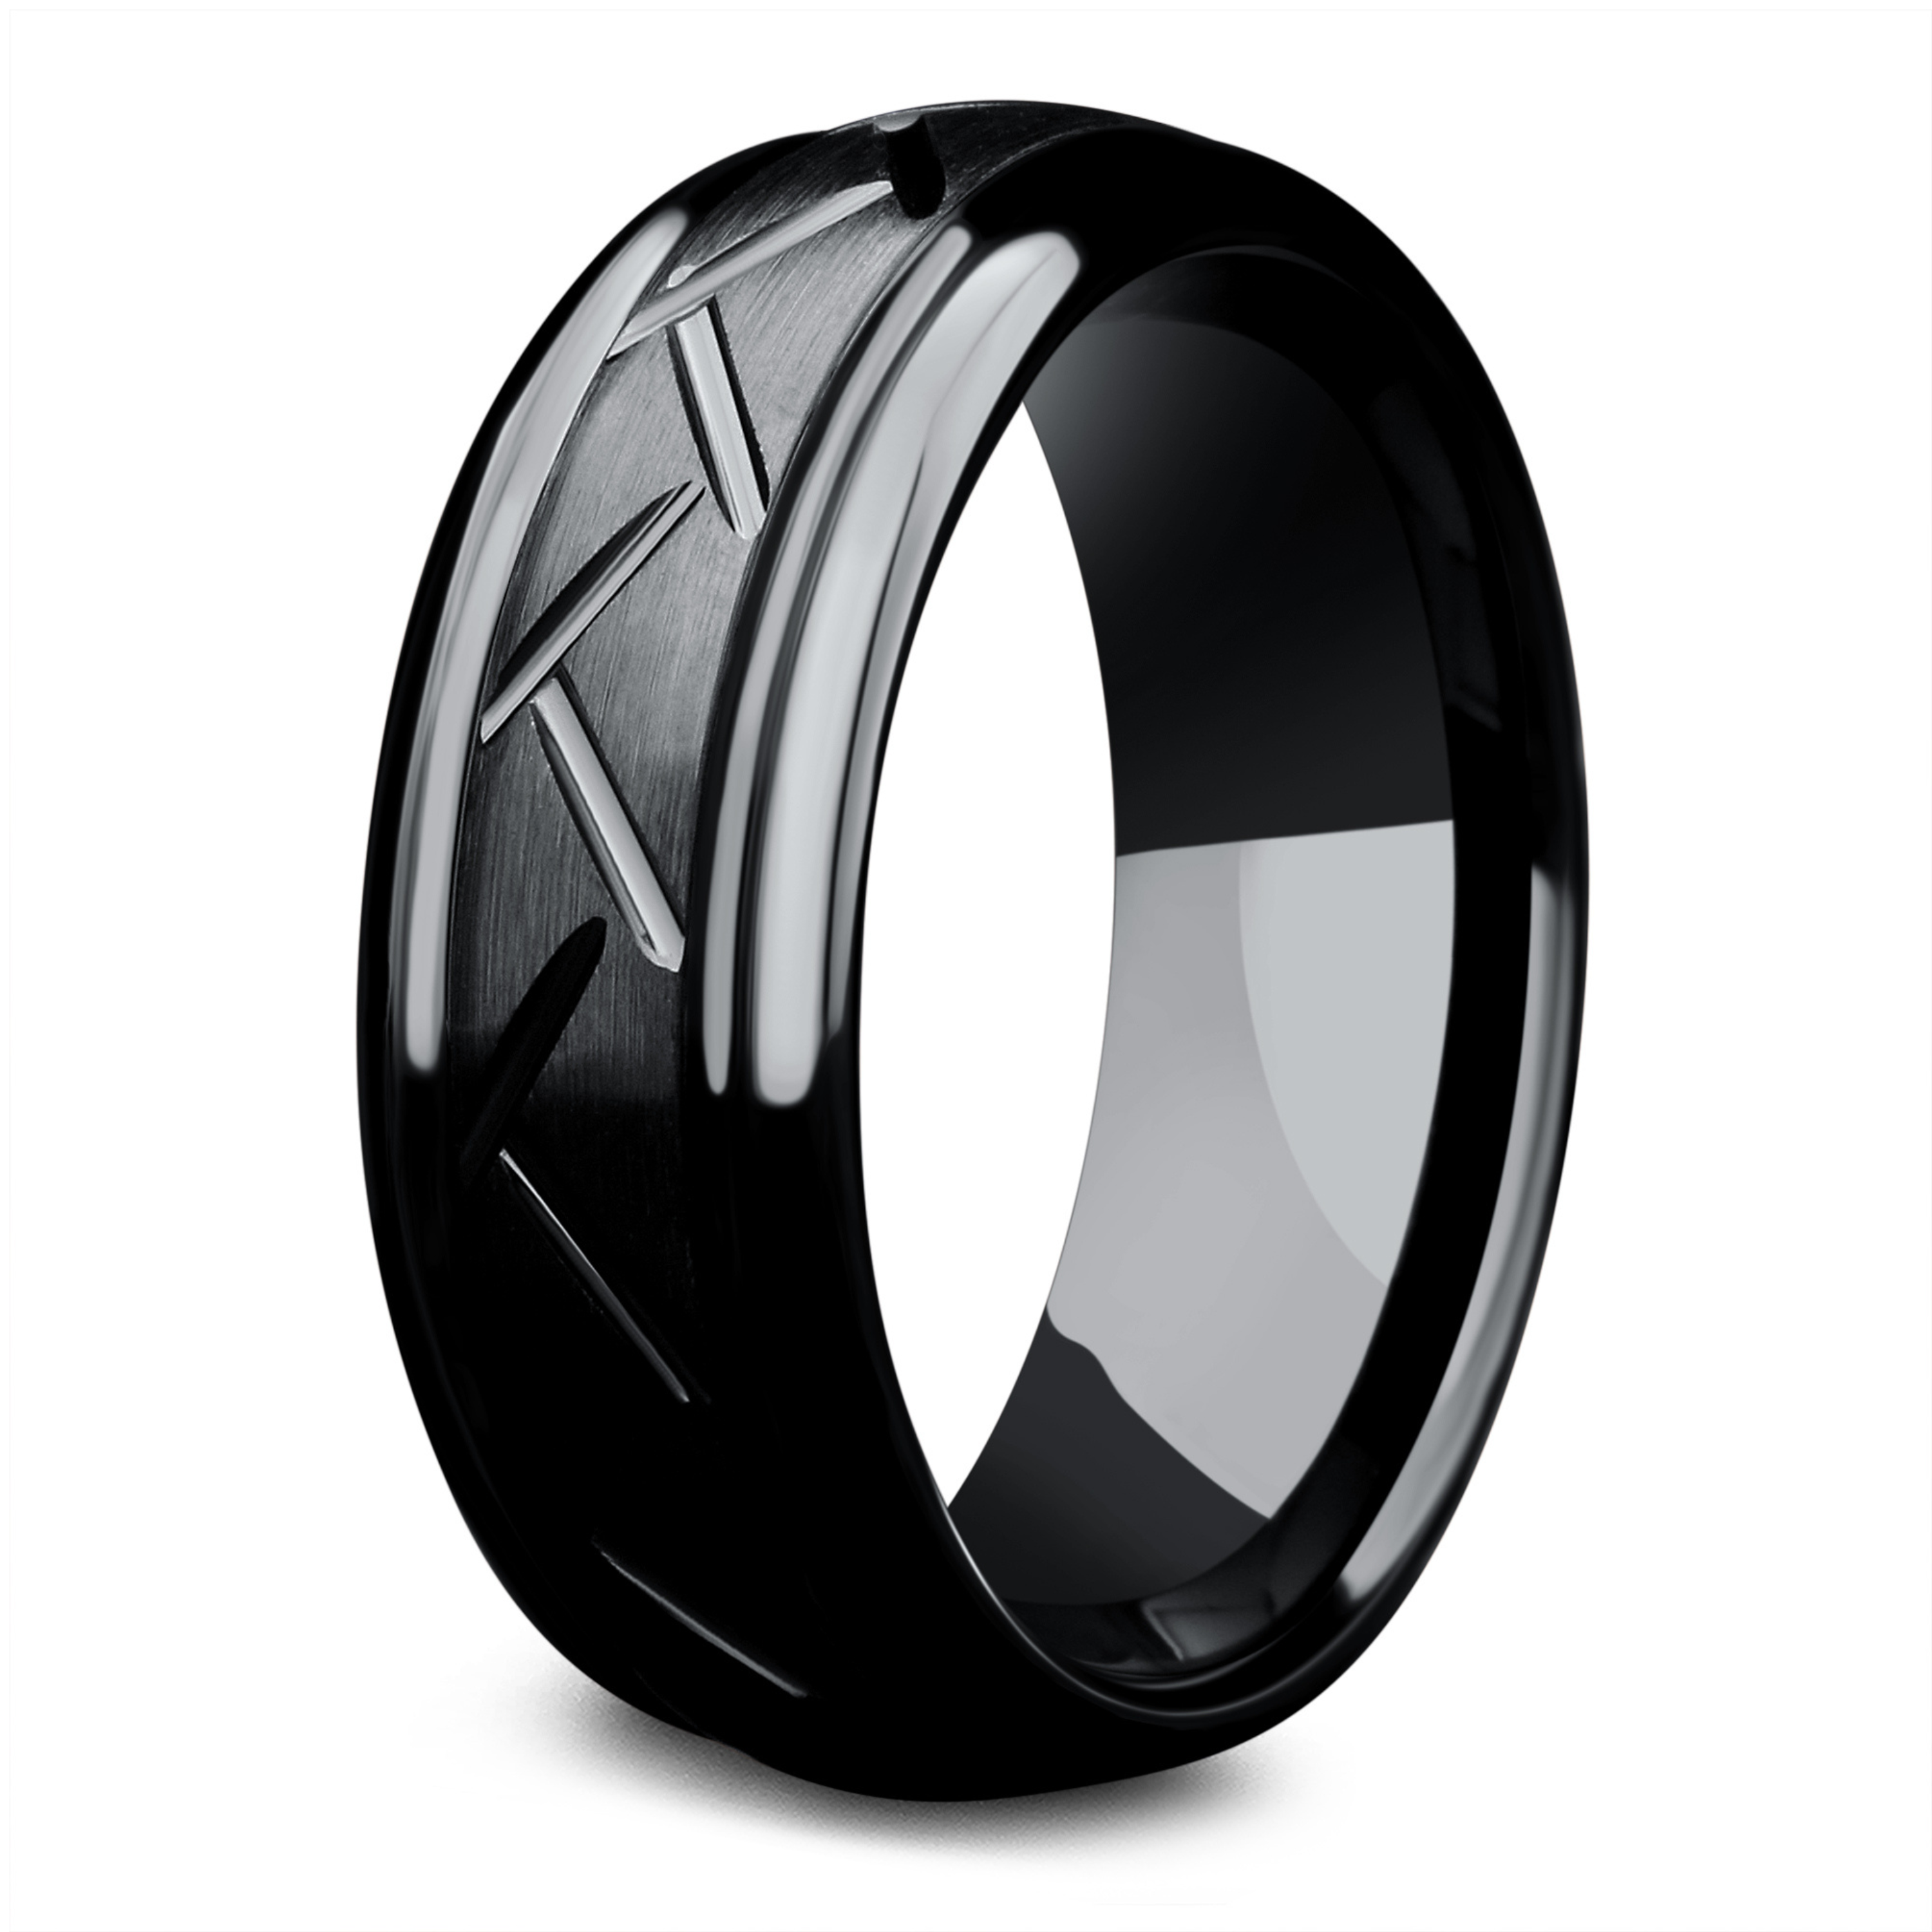 Mens Black 6mm Ceramic Ring with Chequered Pattern